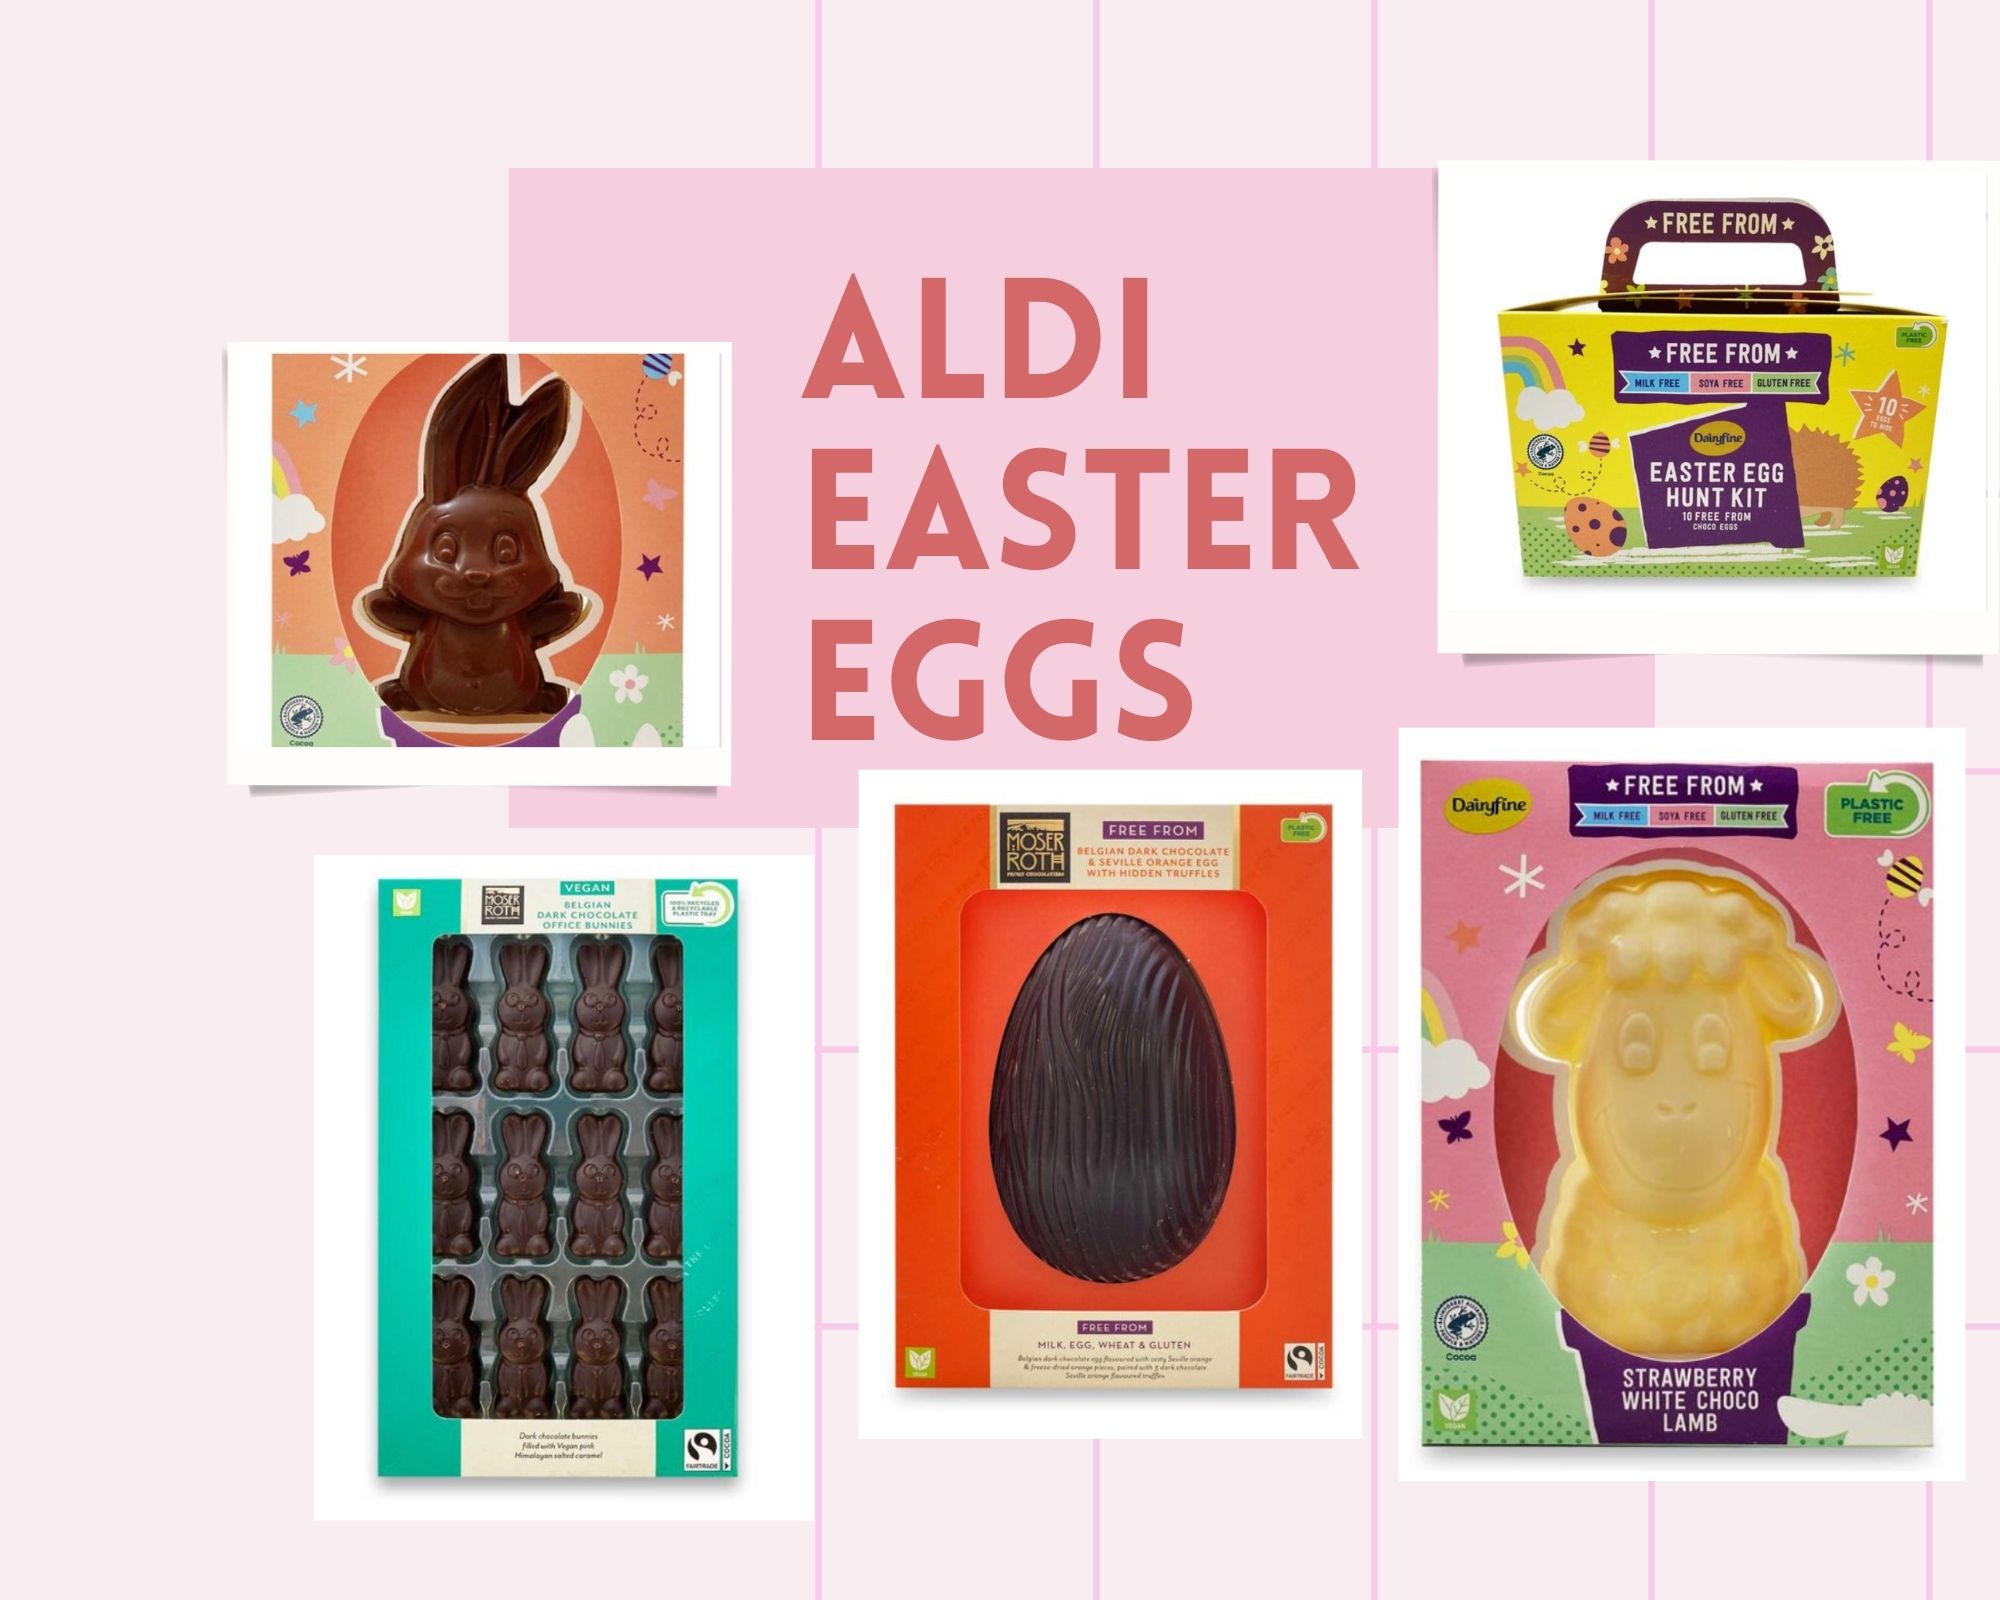 7 Dairy Free Easter Eggs At Aldi Dairy Free Daisy